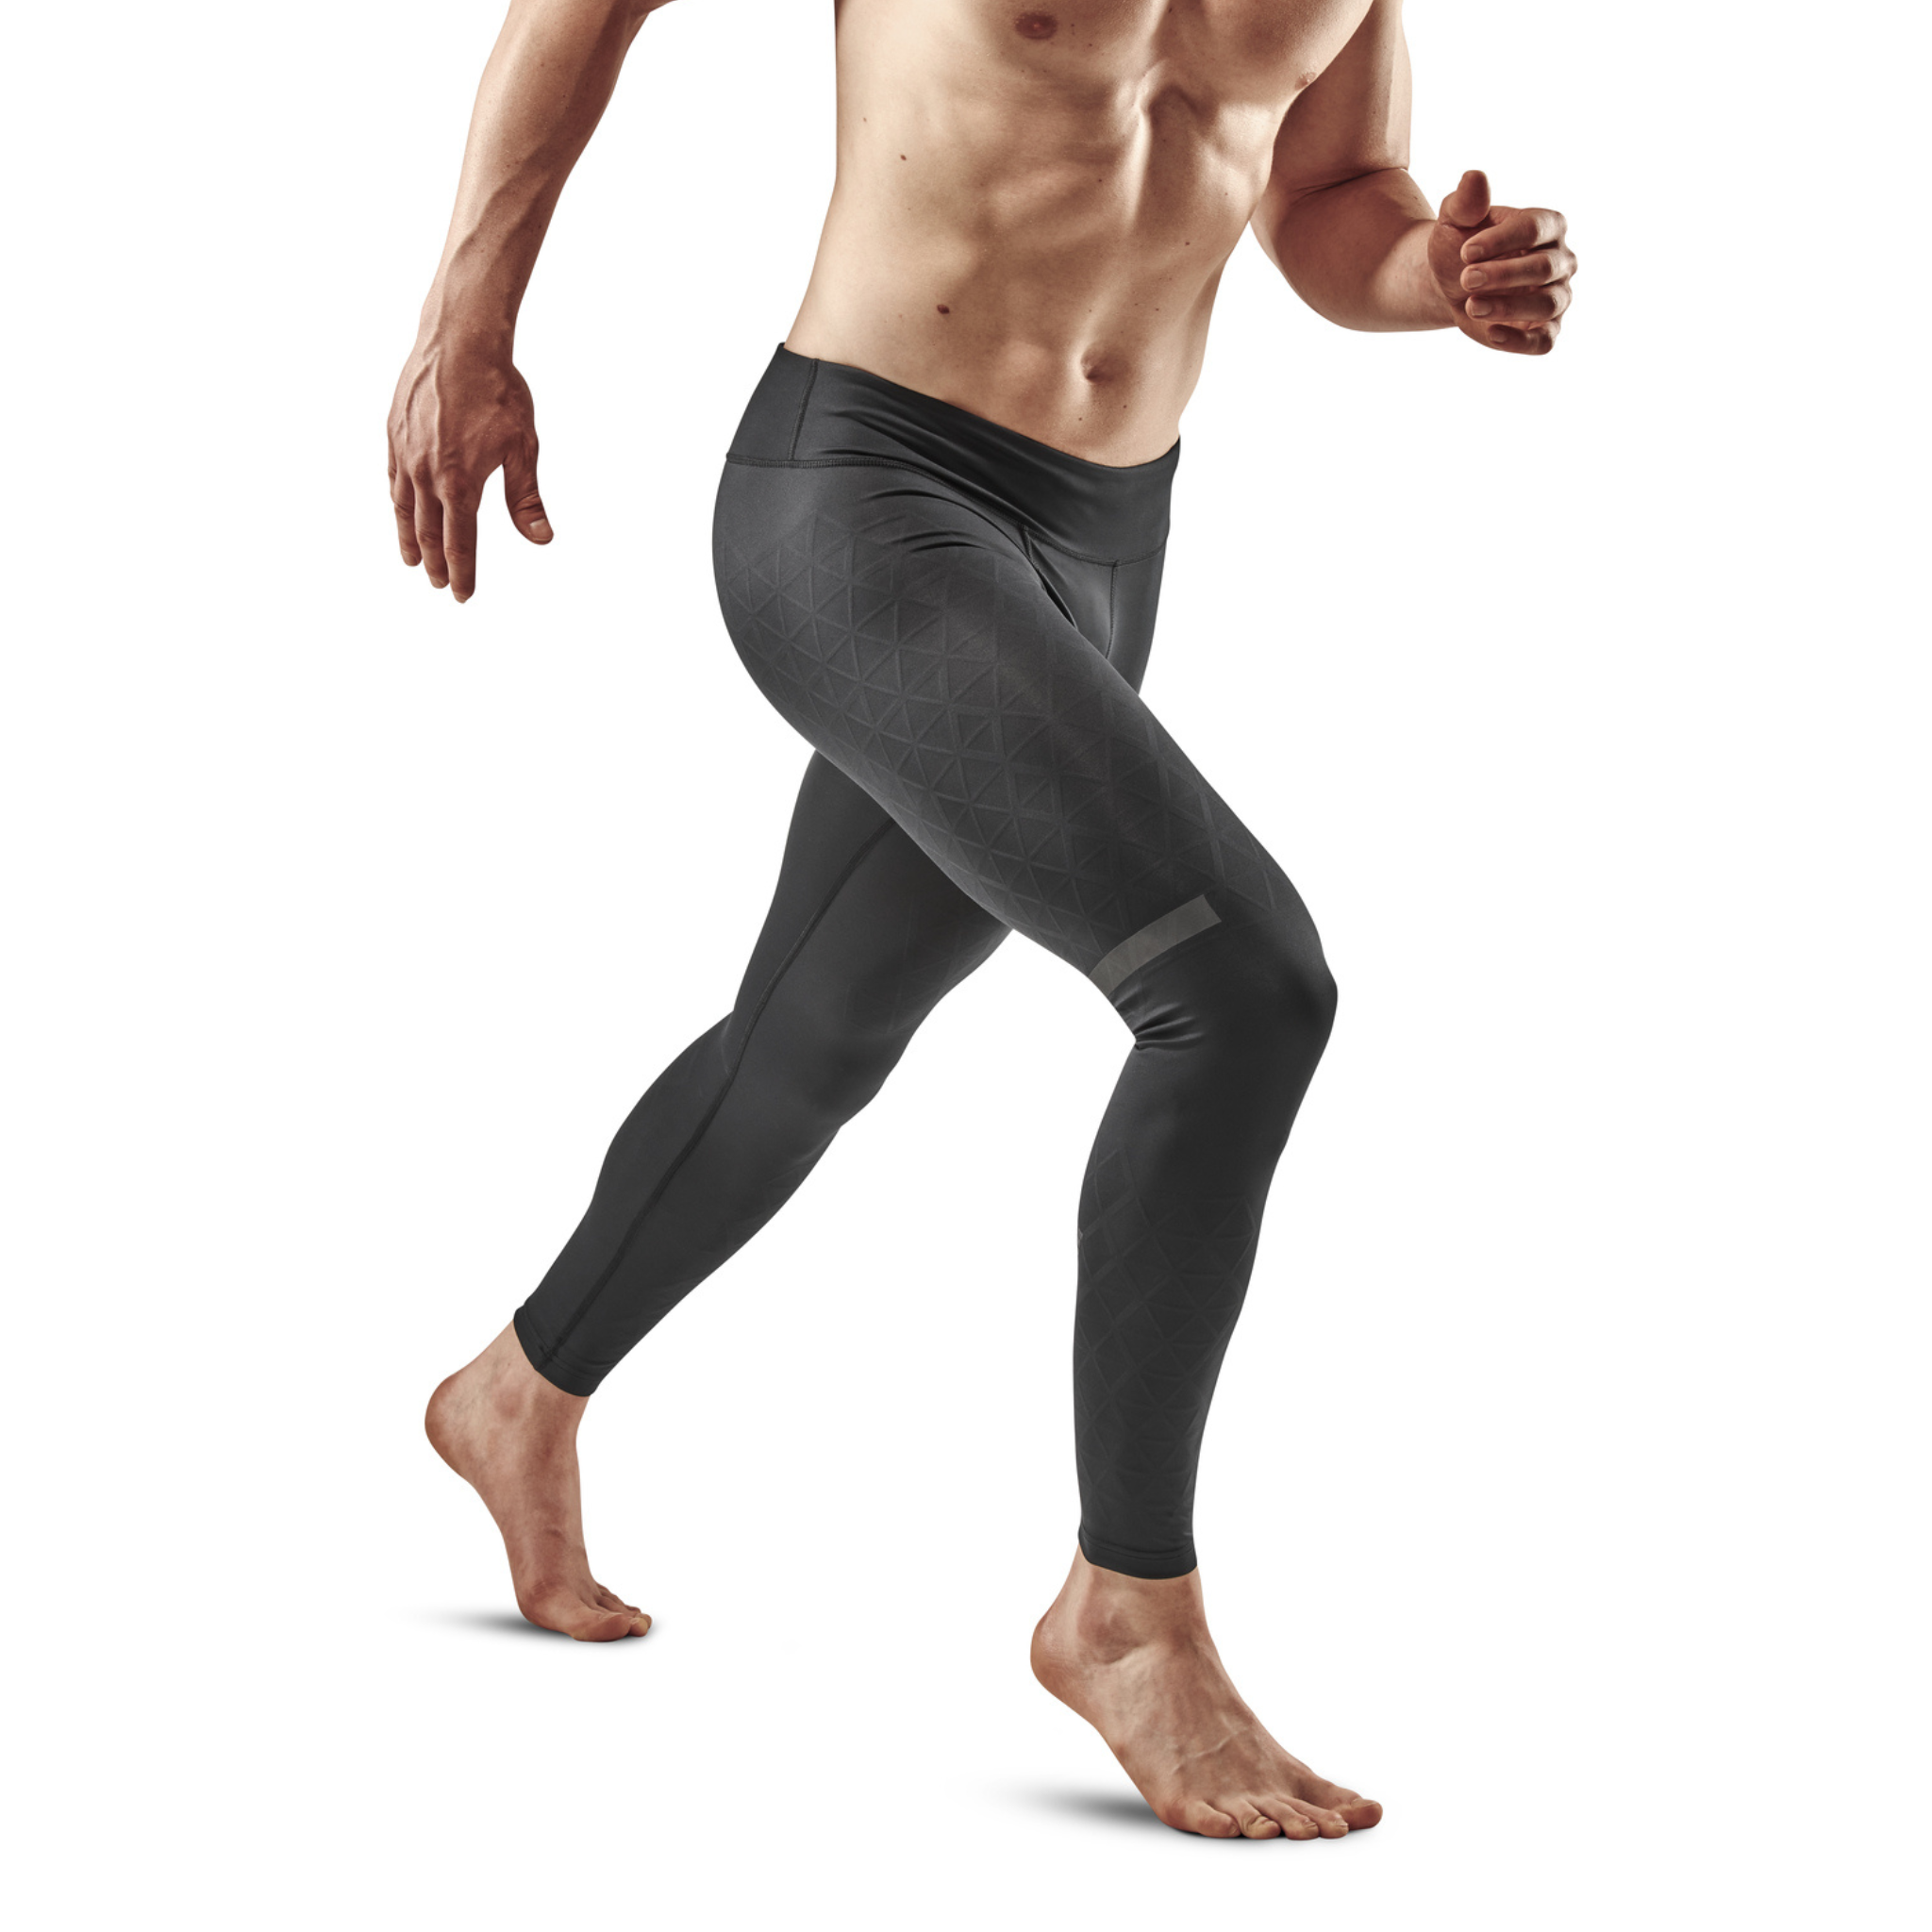 It's Like A Second Skin: SKINS Compression Tights Review